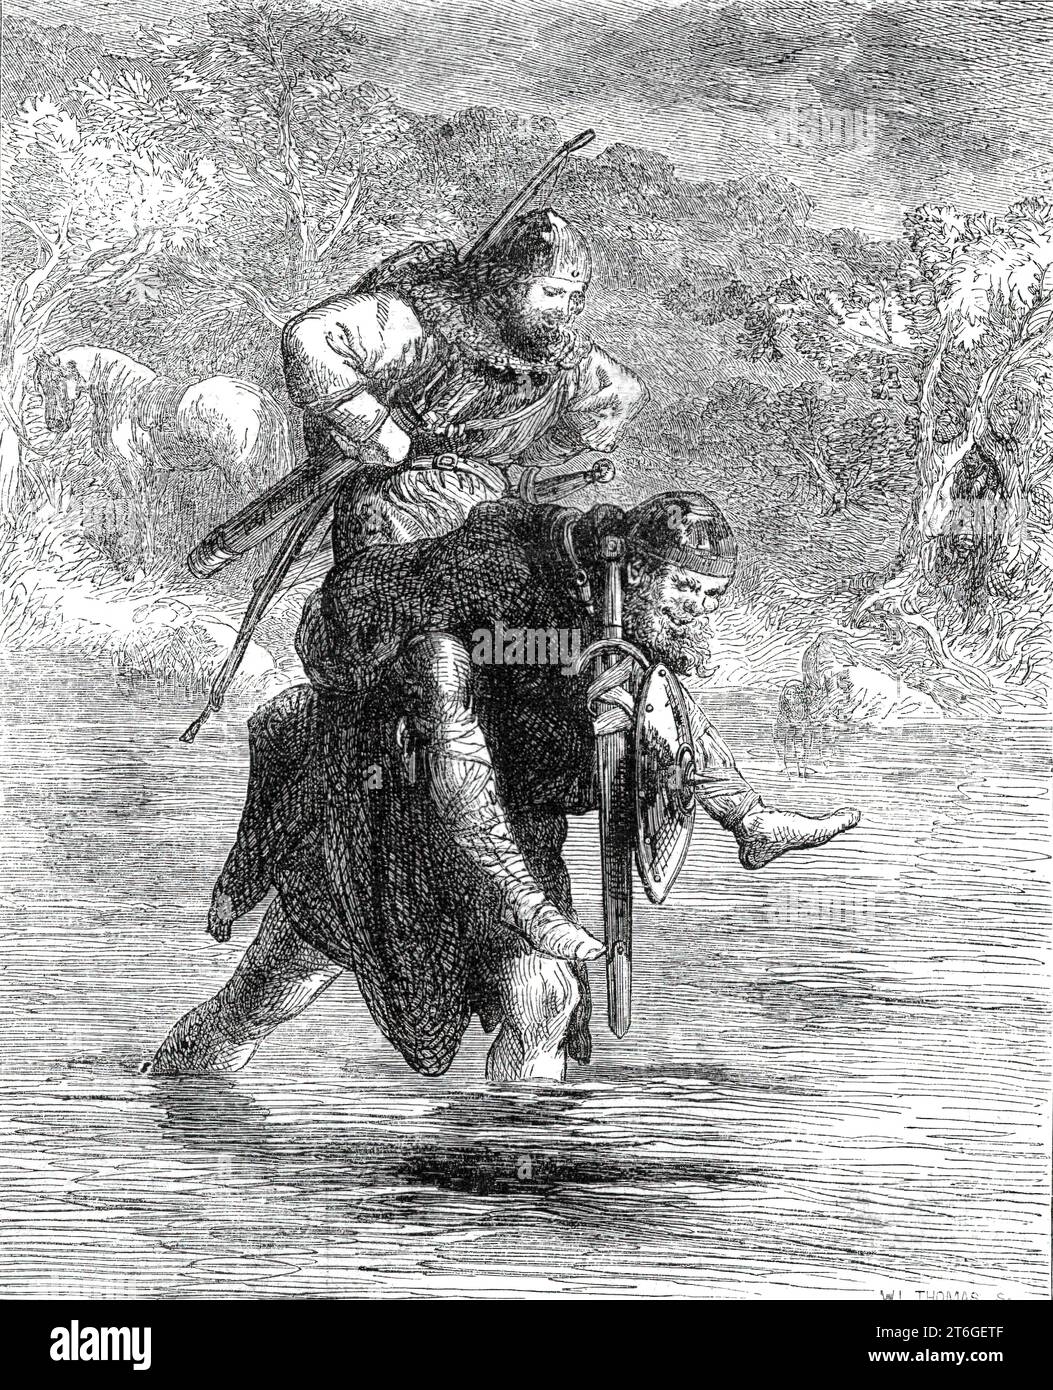 &quot;Robin Hood and the Curtal Friar&quot;, from &quot;The Boy's Book of Ballads&quot;, 1860. 'Of the romantic characteristics of John Gilbert's illustrations it is of course unnecessary to say a word, except that we think we see particular marks of care and finish in the details of each picture. We engrave a very spirited specimen of the illustrations, one which pertains to the ballad of &quot;Robin Hood and the Curtal Friar,&quot; and the gist of which is to be found in the following lines: &quot;The friar took Robin Hood on his back, Deep water he did bestride, And spake neither good word Stock Photo